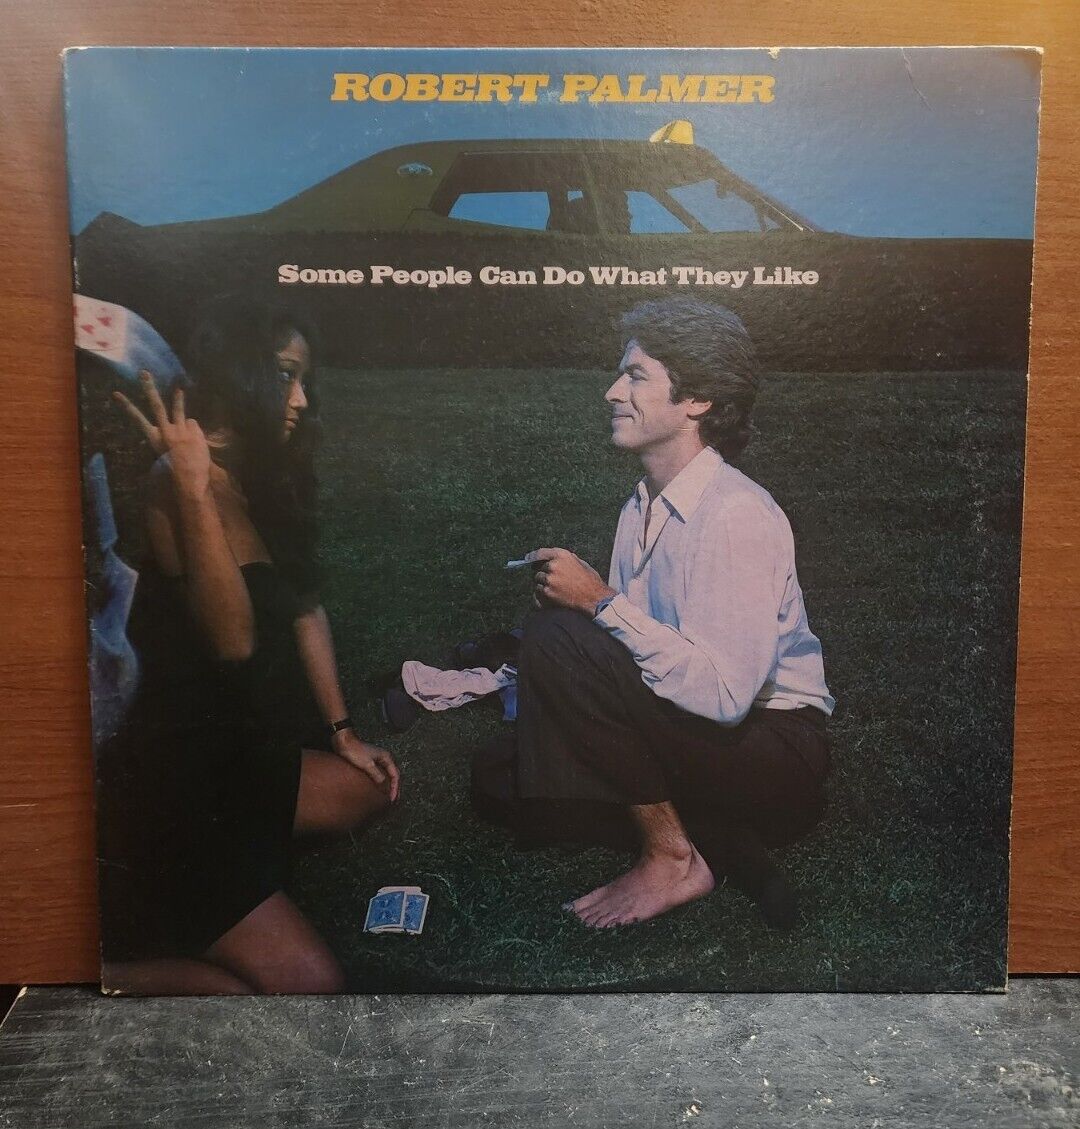 Robert Palmer - Some People Can Do What They Like Vinyl LP - Island ILPS 9420